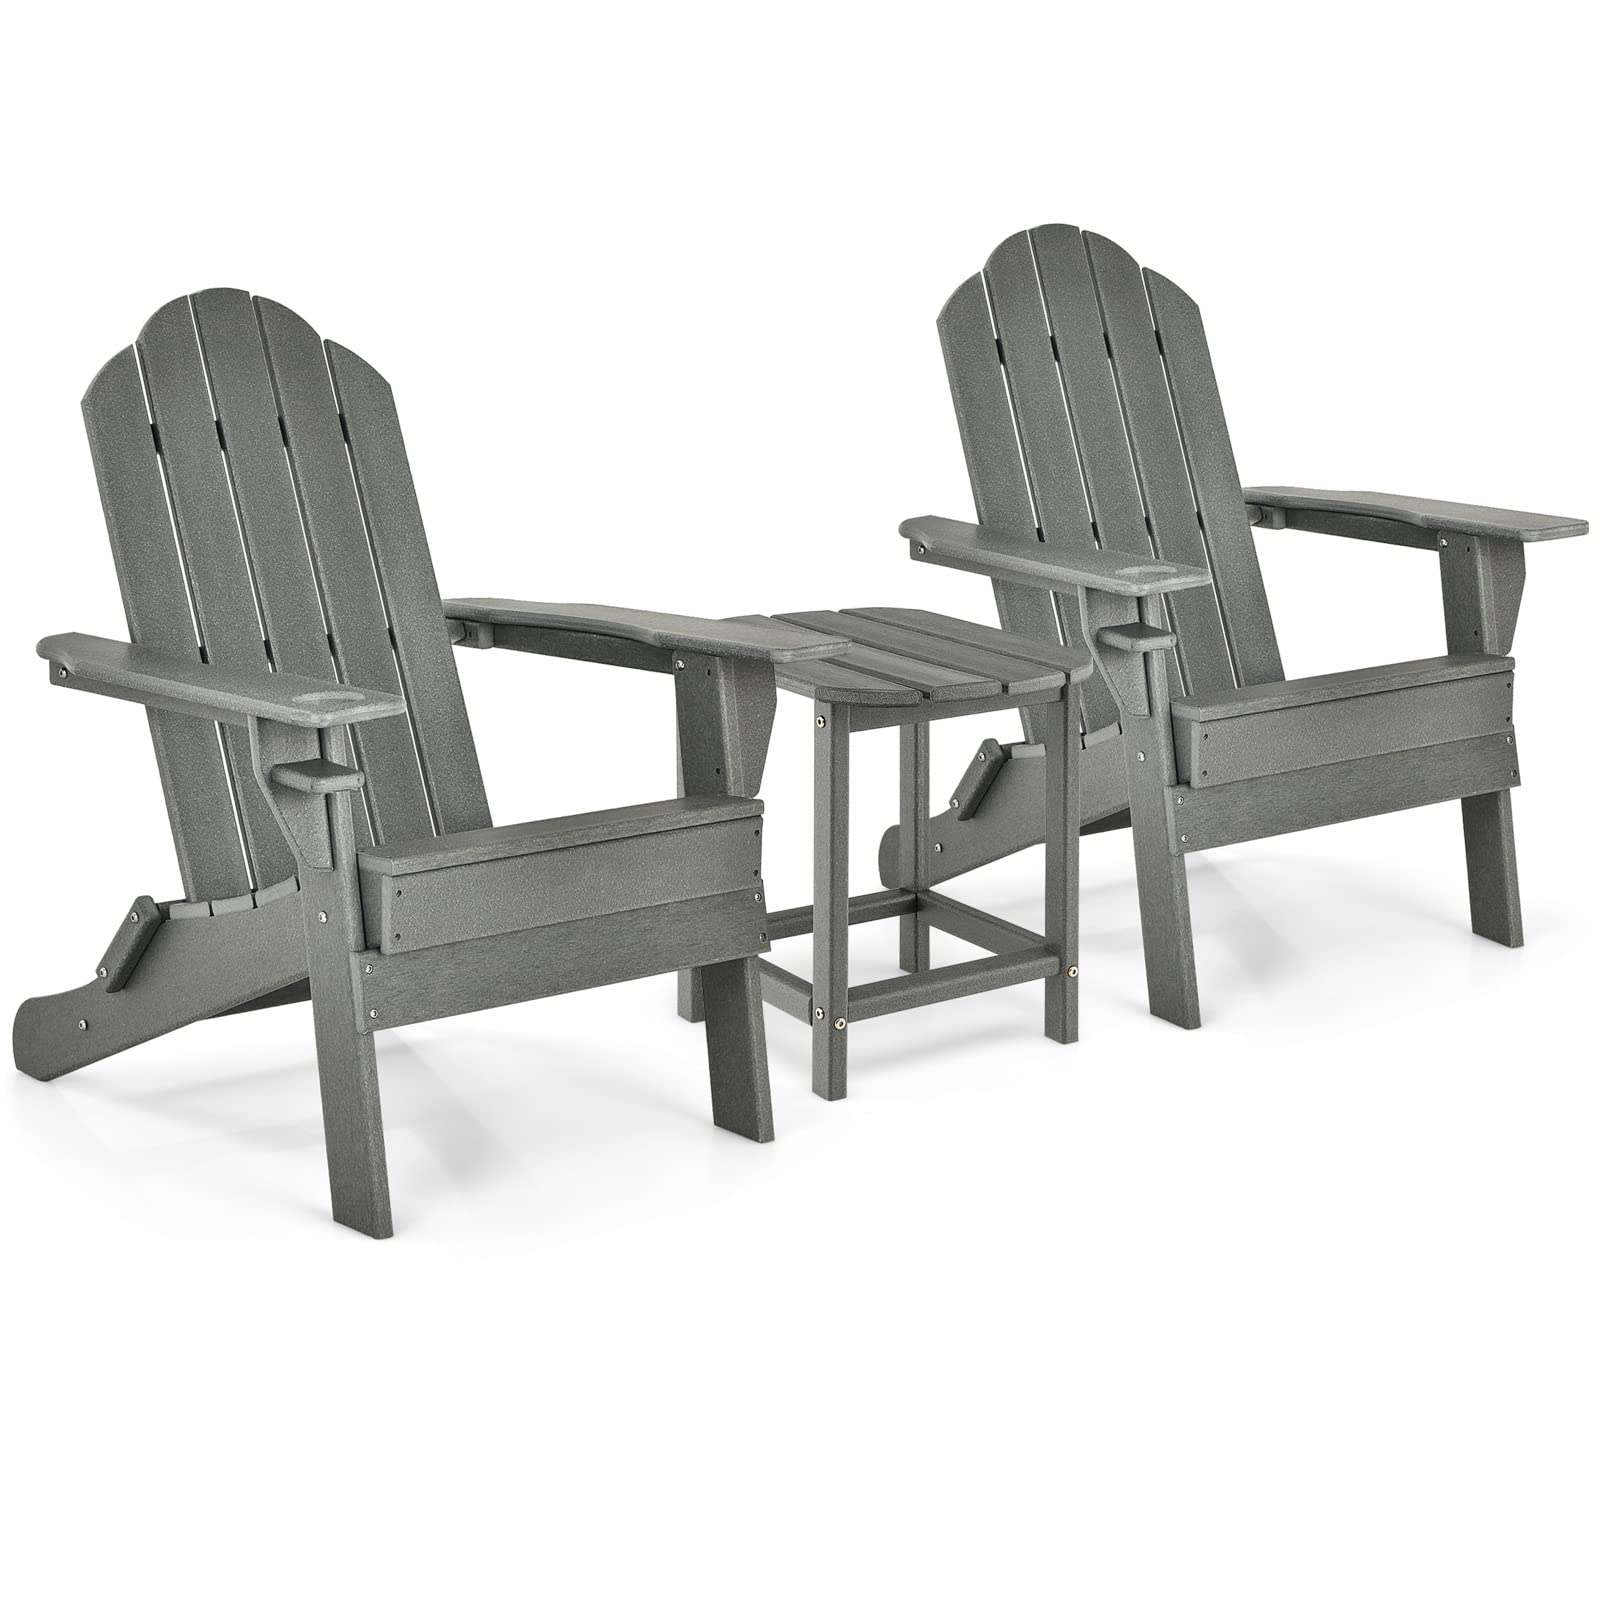 Folding Adirondack Chair with Side Table, Outdoor Adirondack Chair w/Cup Holder